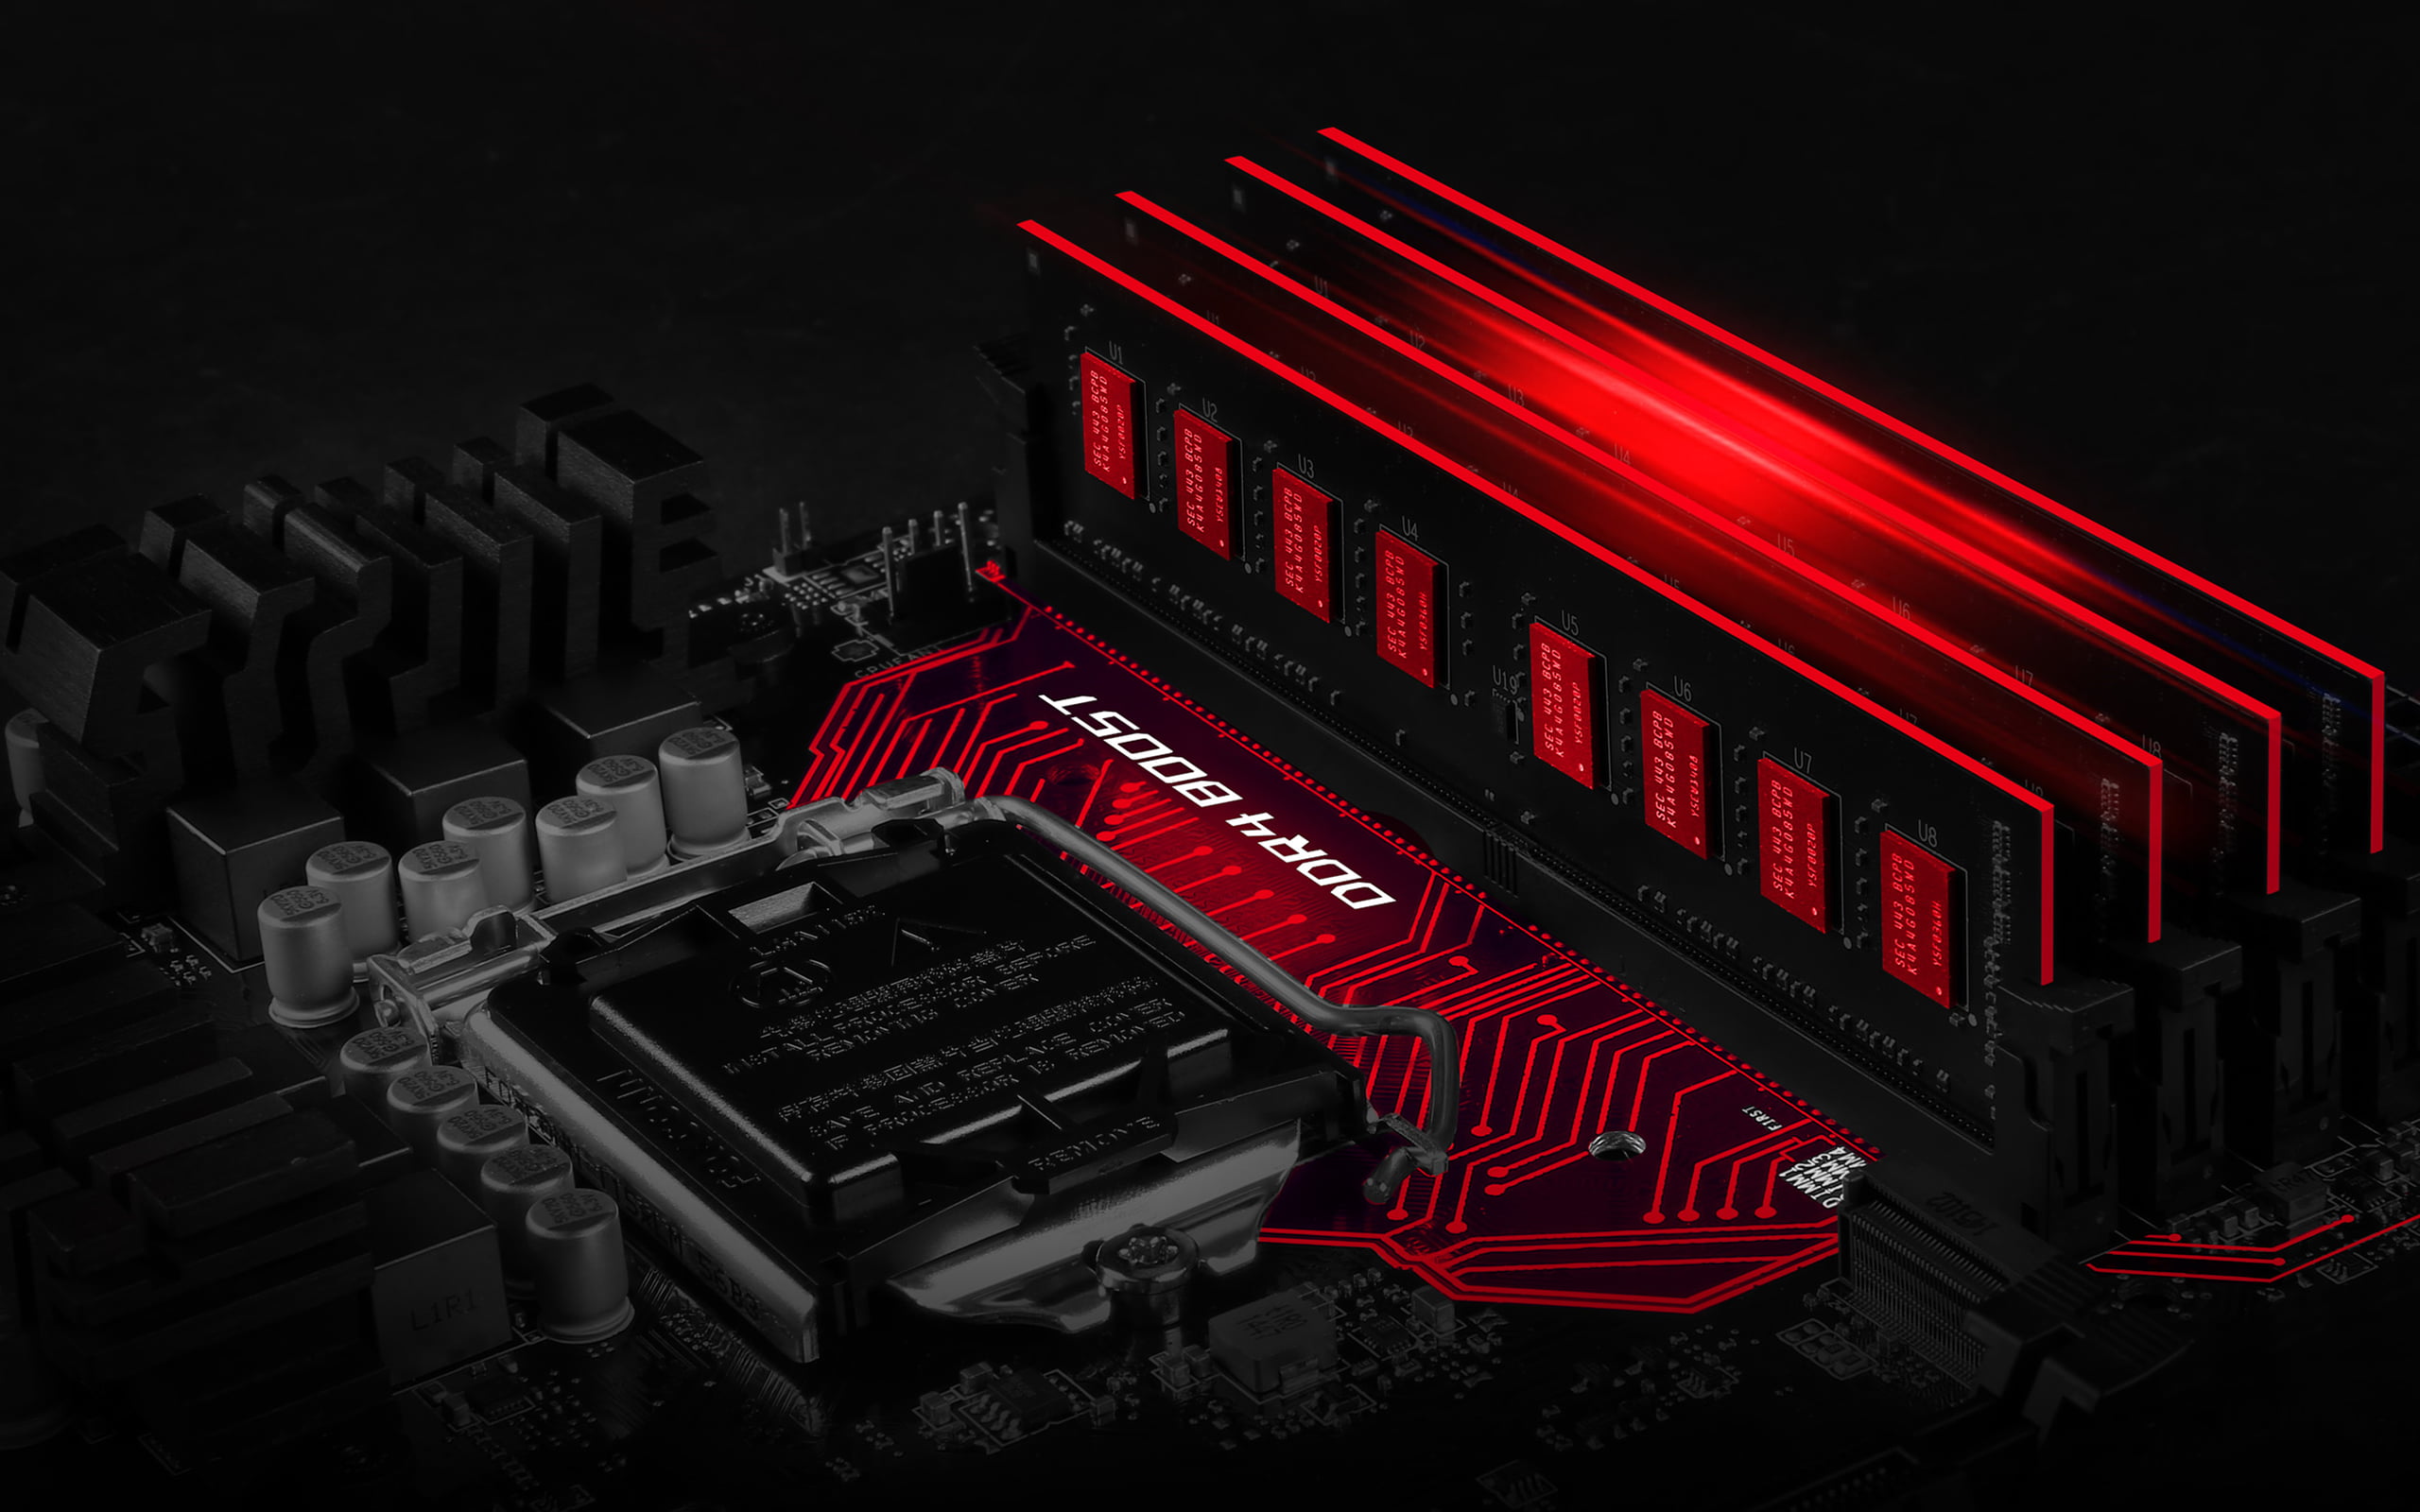 black and red motherboard, PC gaming, motherboards, MSI, computer